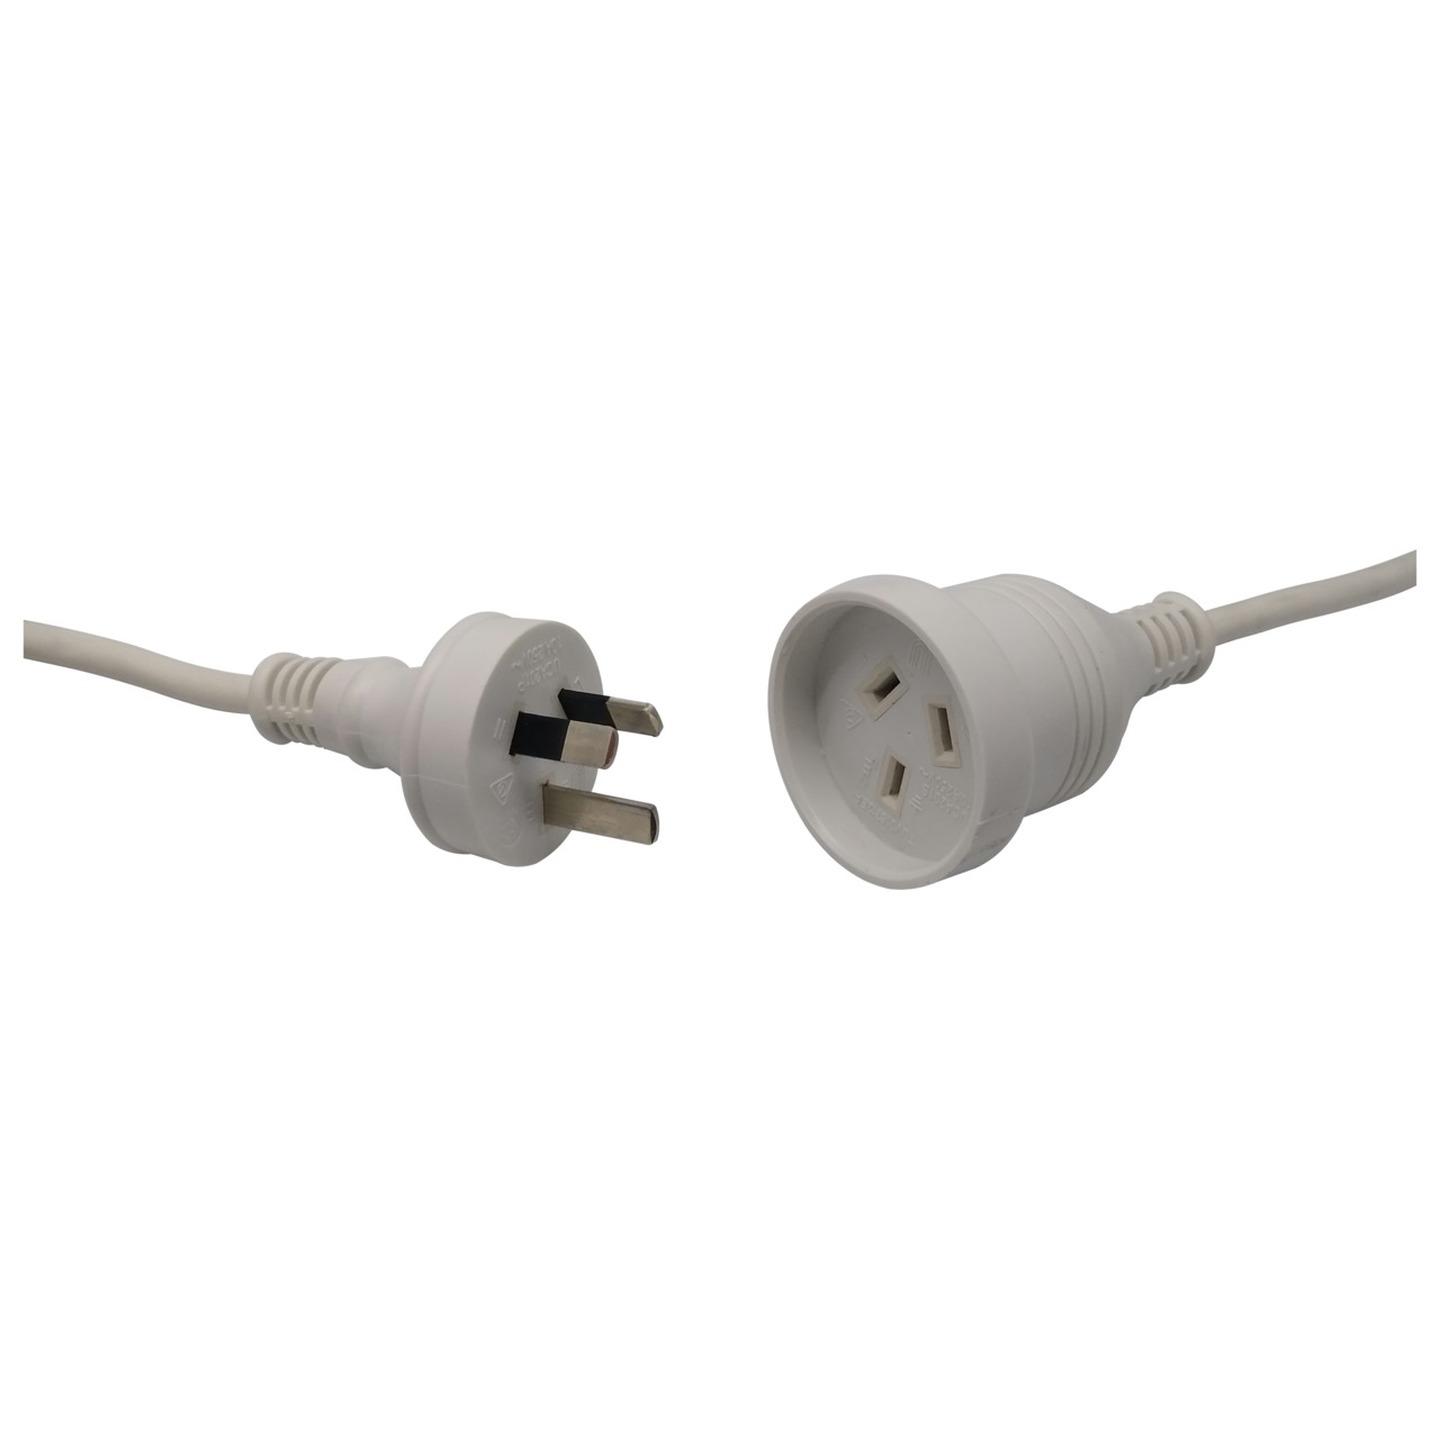 10m White Mains Extension Cable